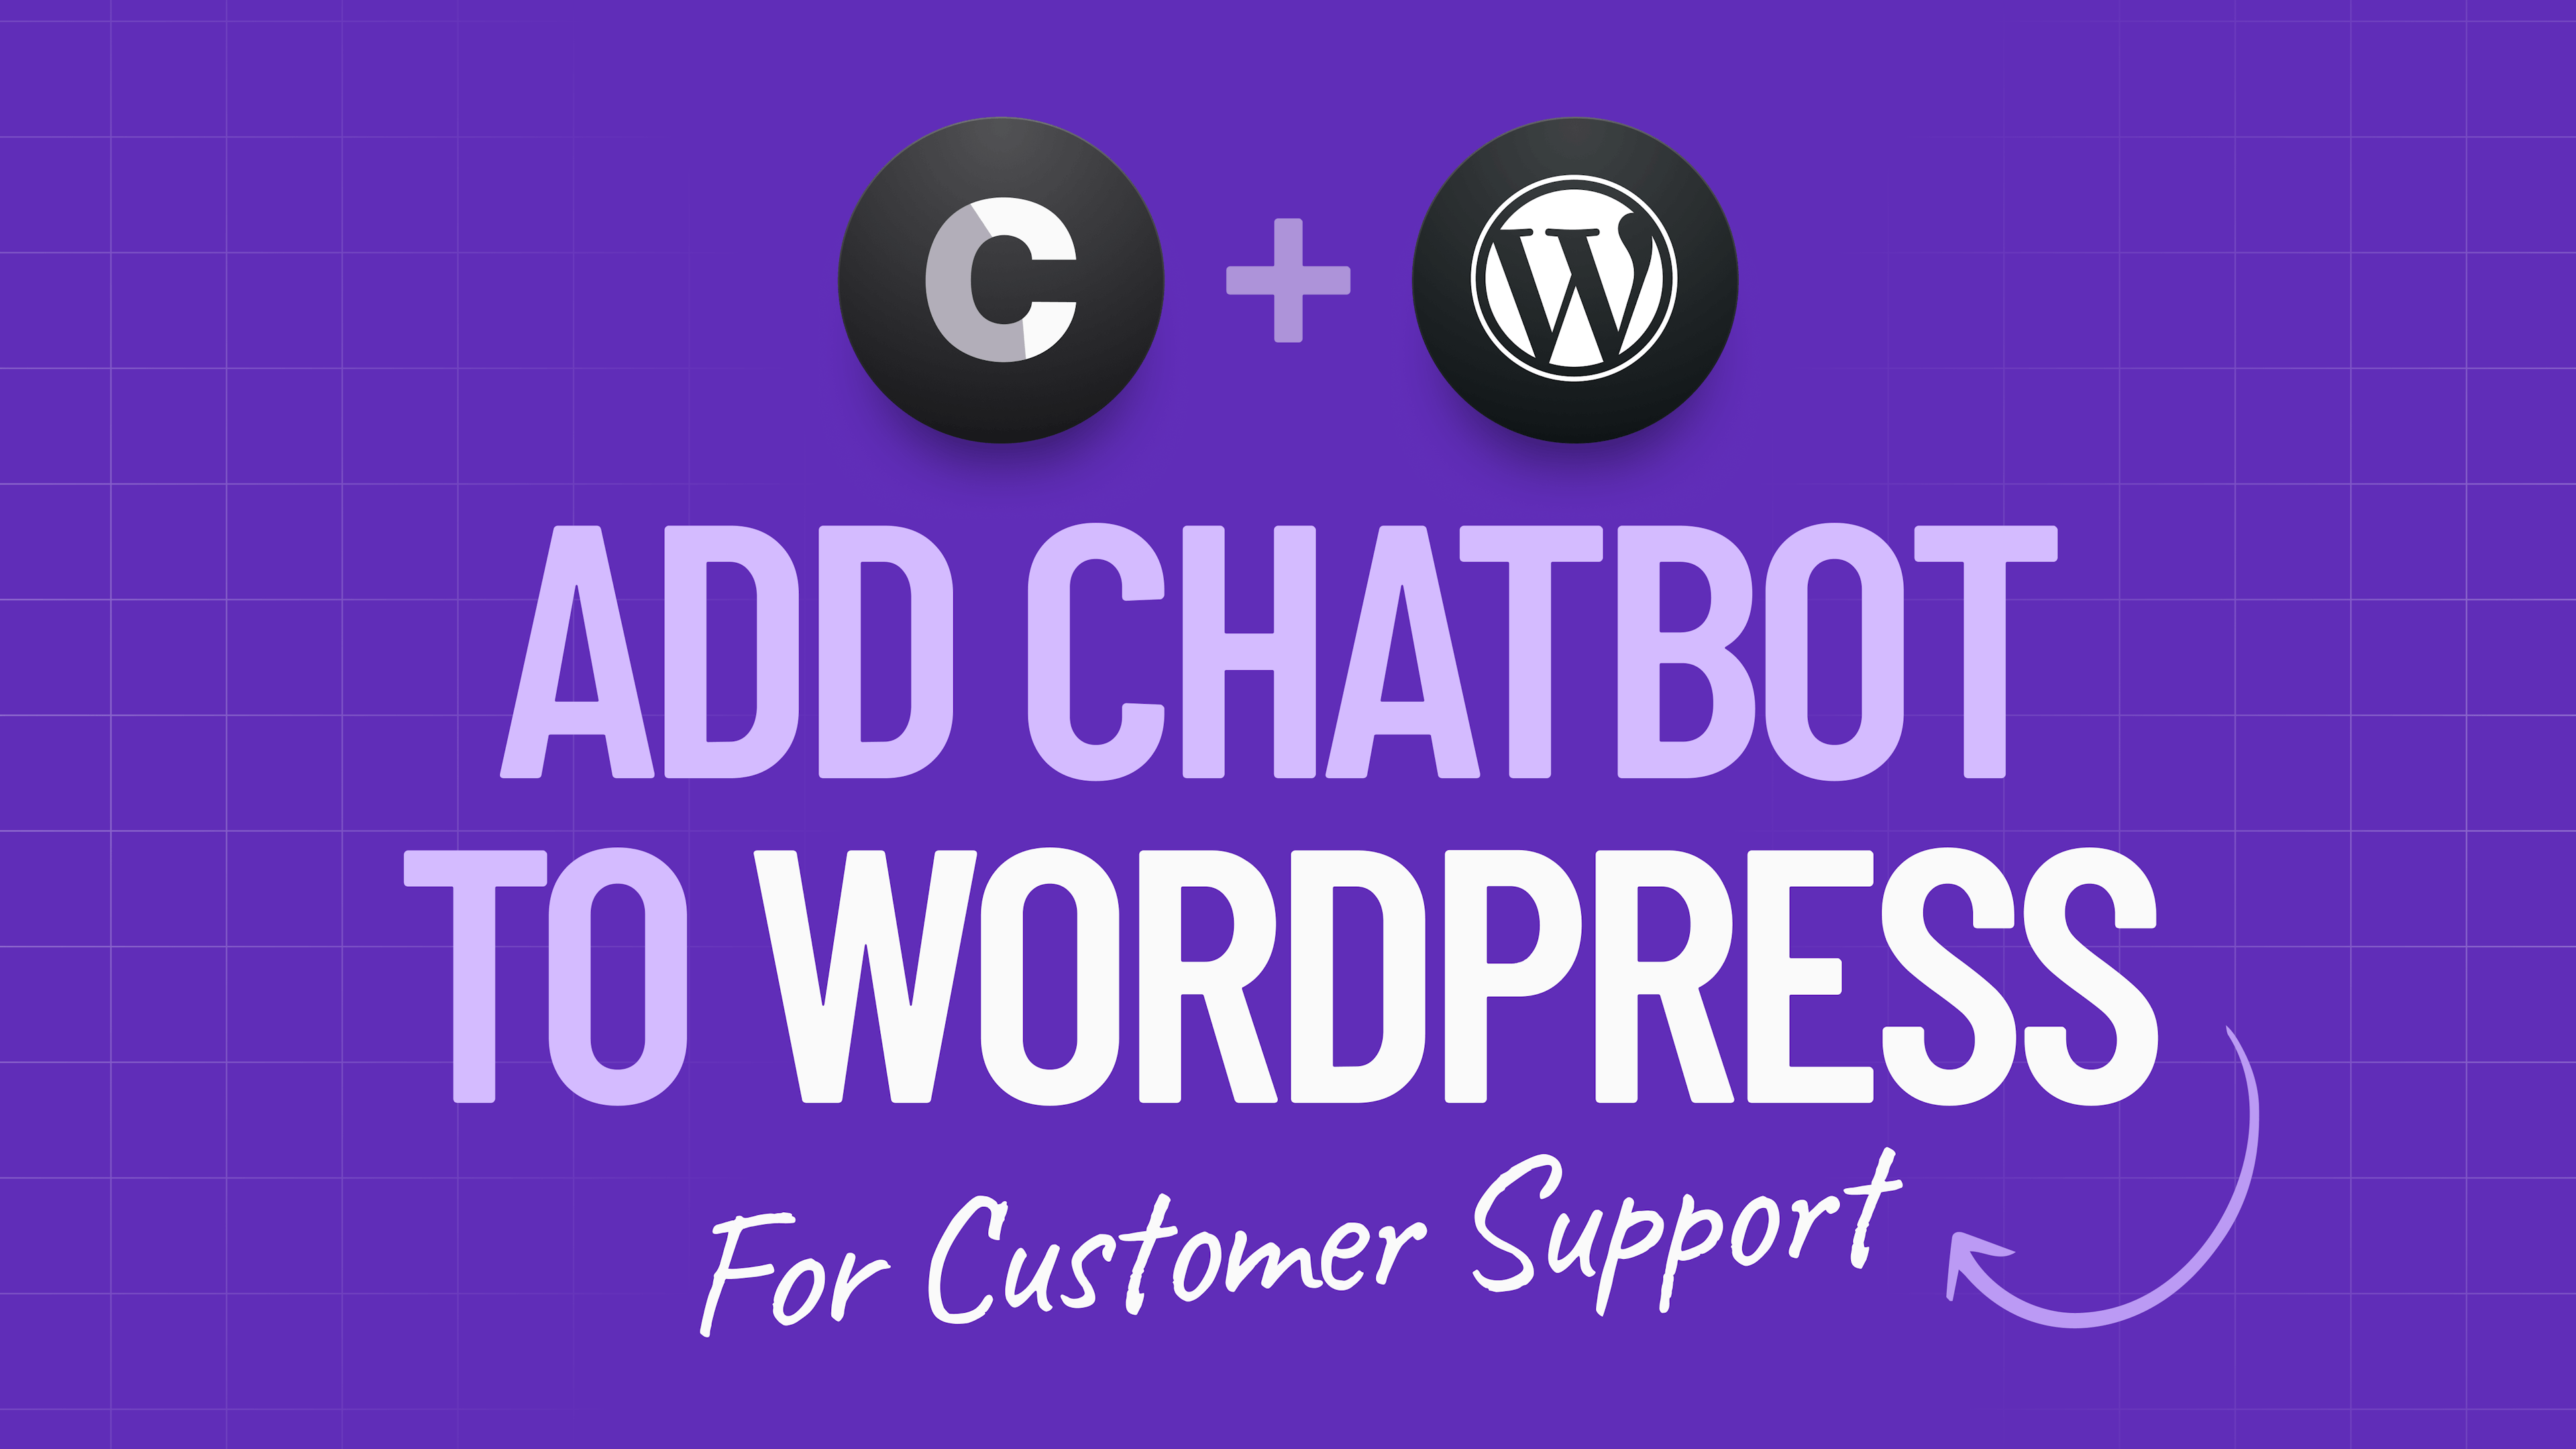 How to Add a Chatbot to Your WordPress Website